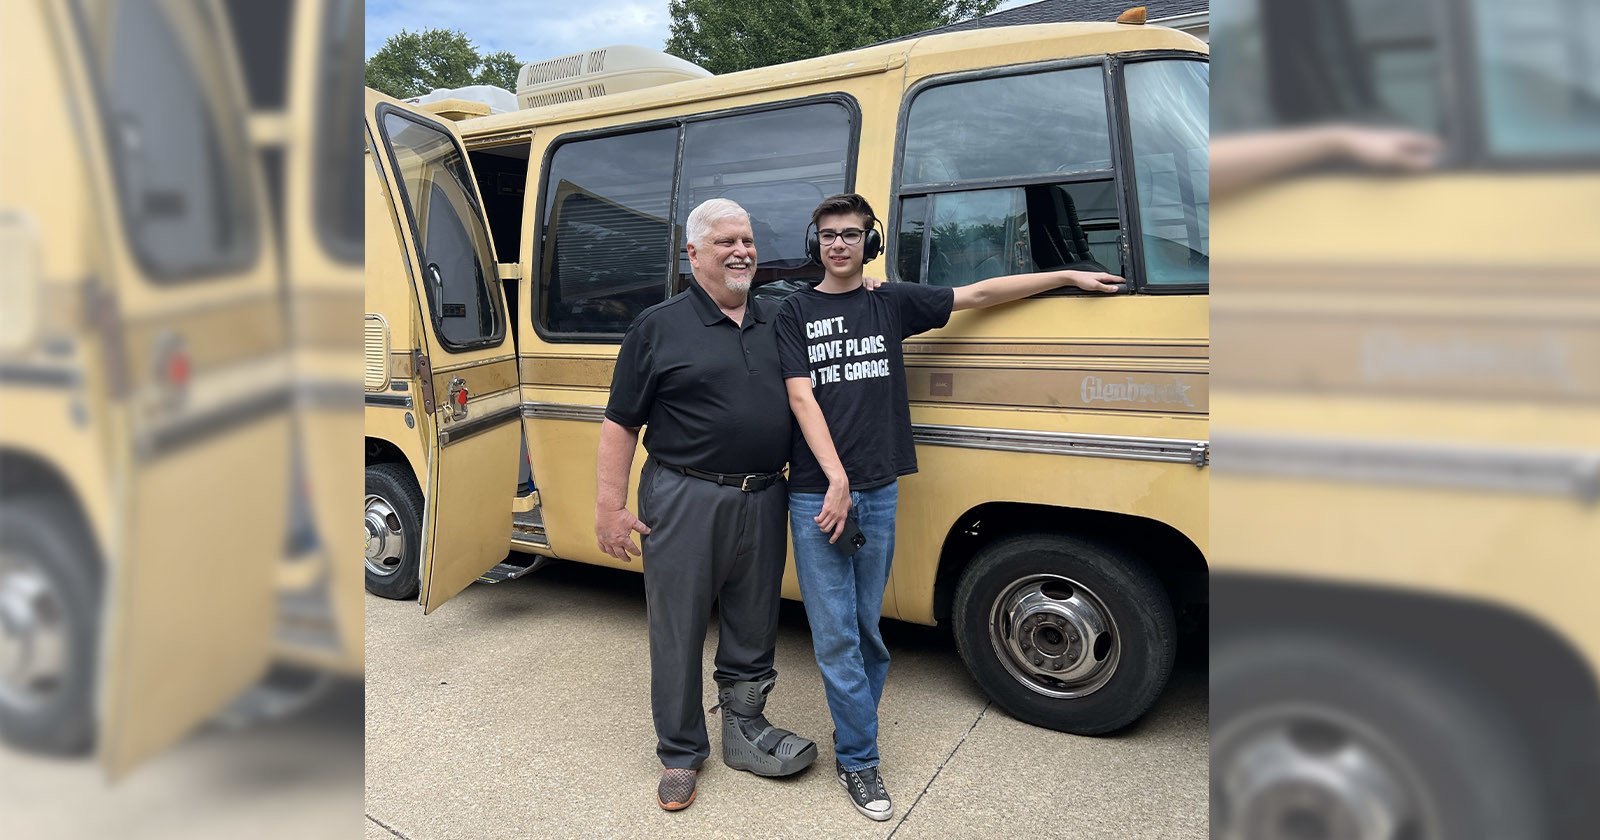 Teen Car Photographer with Autism is Gifted RV by Retired Cameraman